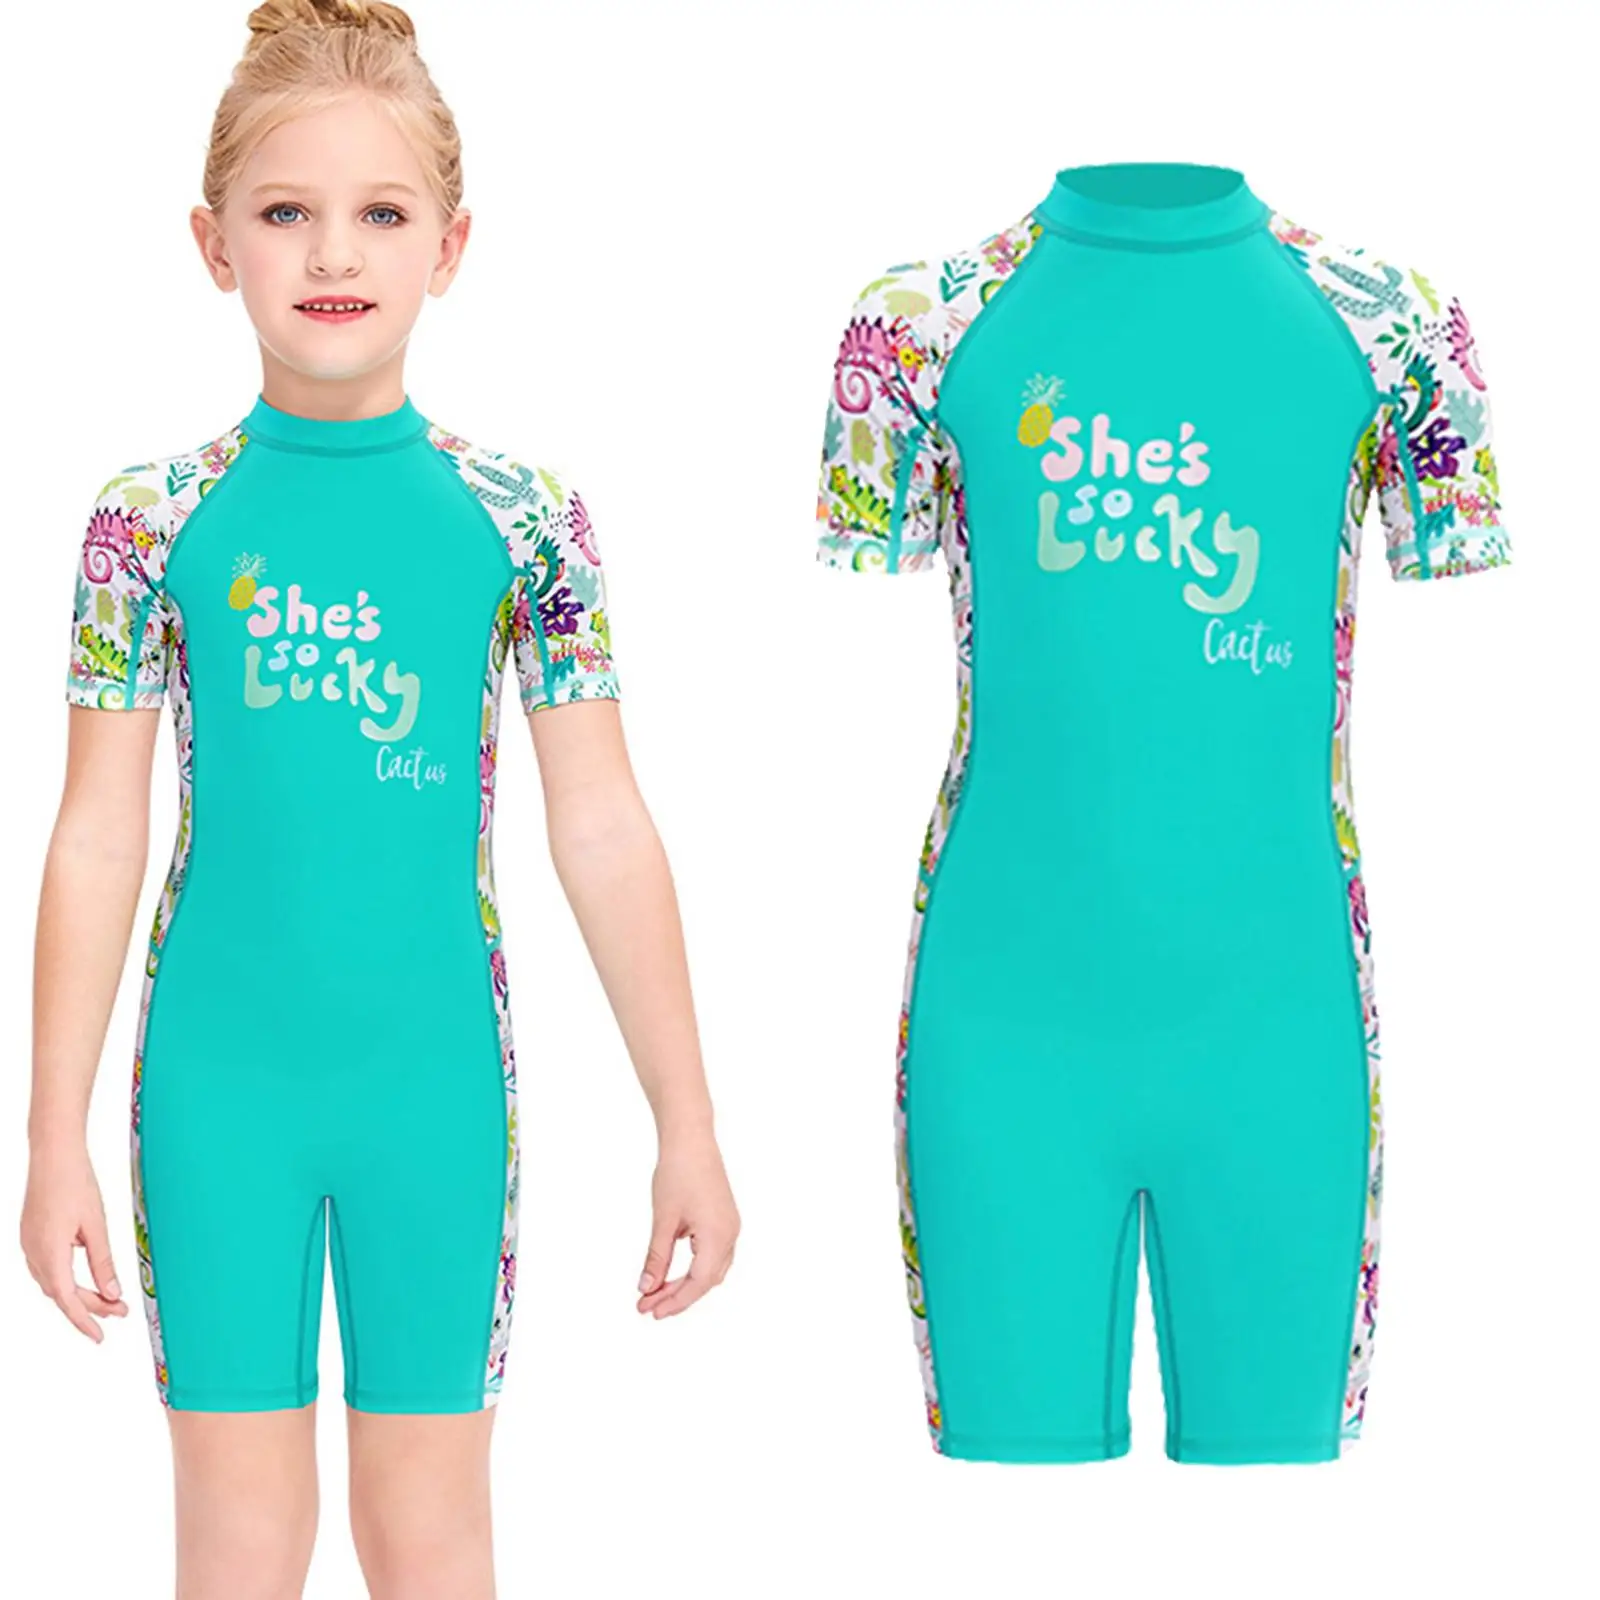 Kids Shorty suit  Swimsuits + Sun  Neoprene Kids suit for Diving Surfing Swimming